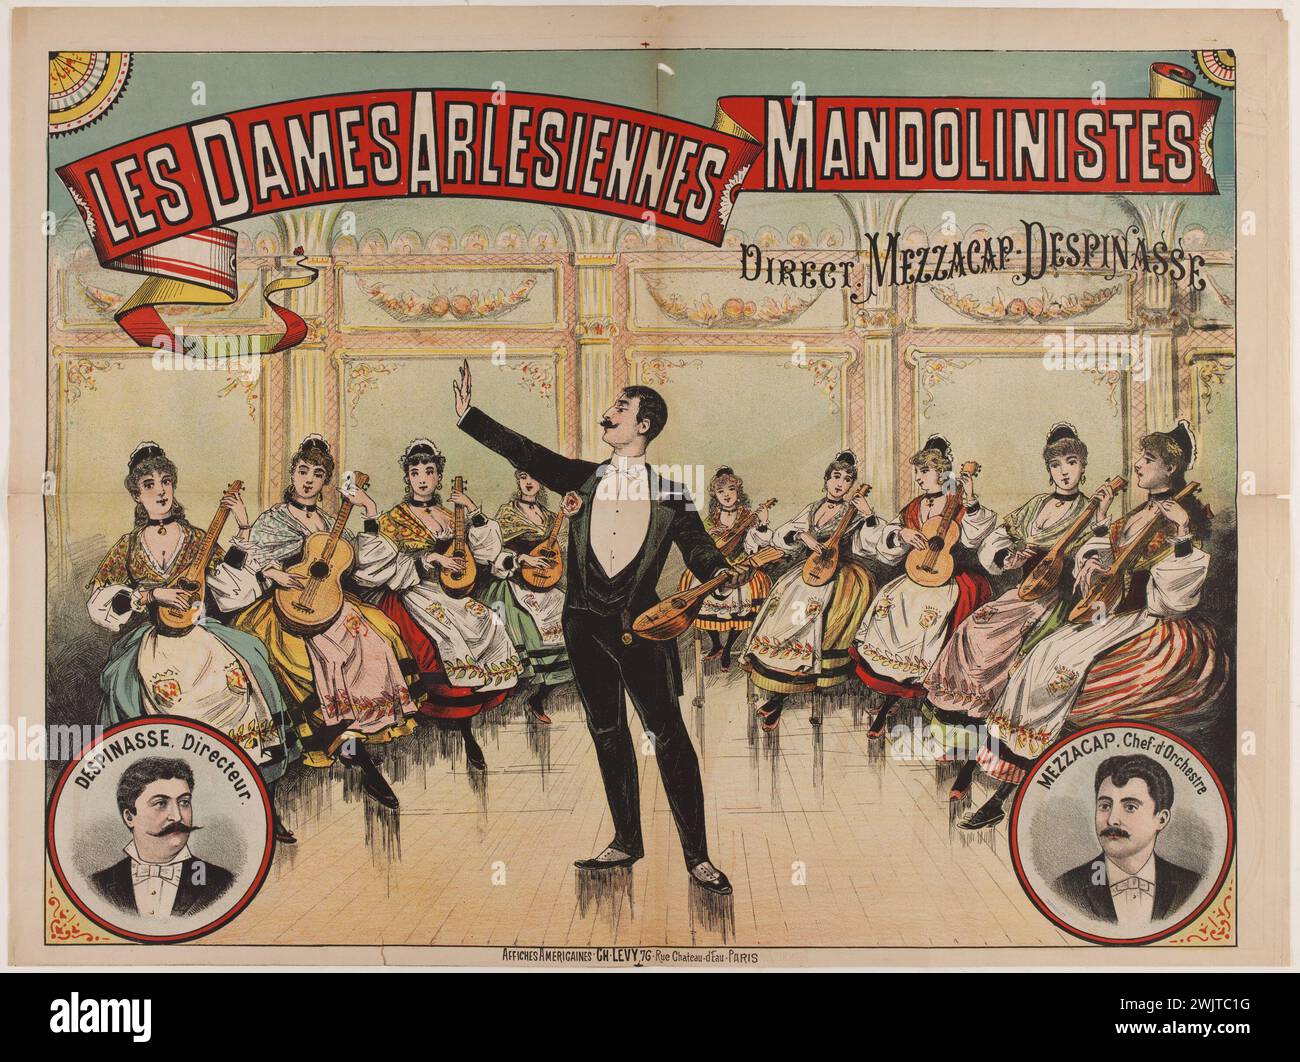 Poster for the concert 'Les Dames Arlesiennes Mandolinistes'. Color lithography. 1880-1900. Paris, Carnavalet museum. 76519-15 Arlesienne, poster, concert, woman, playing, color lithography, mandolin, music Stock Photo